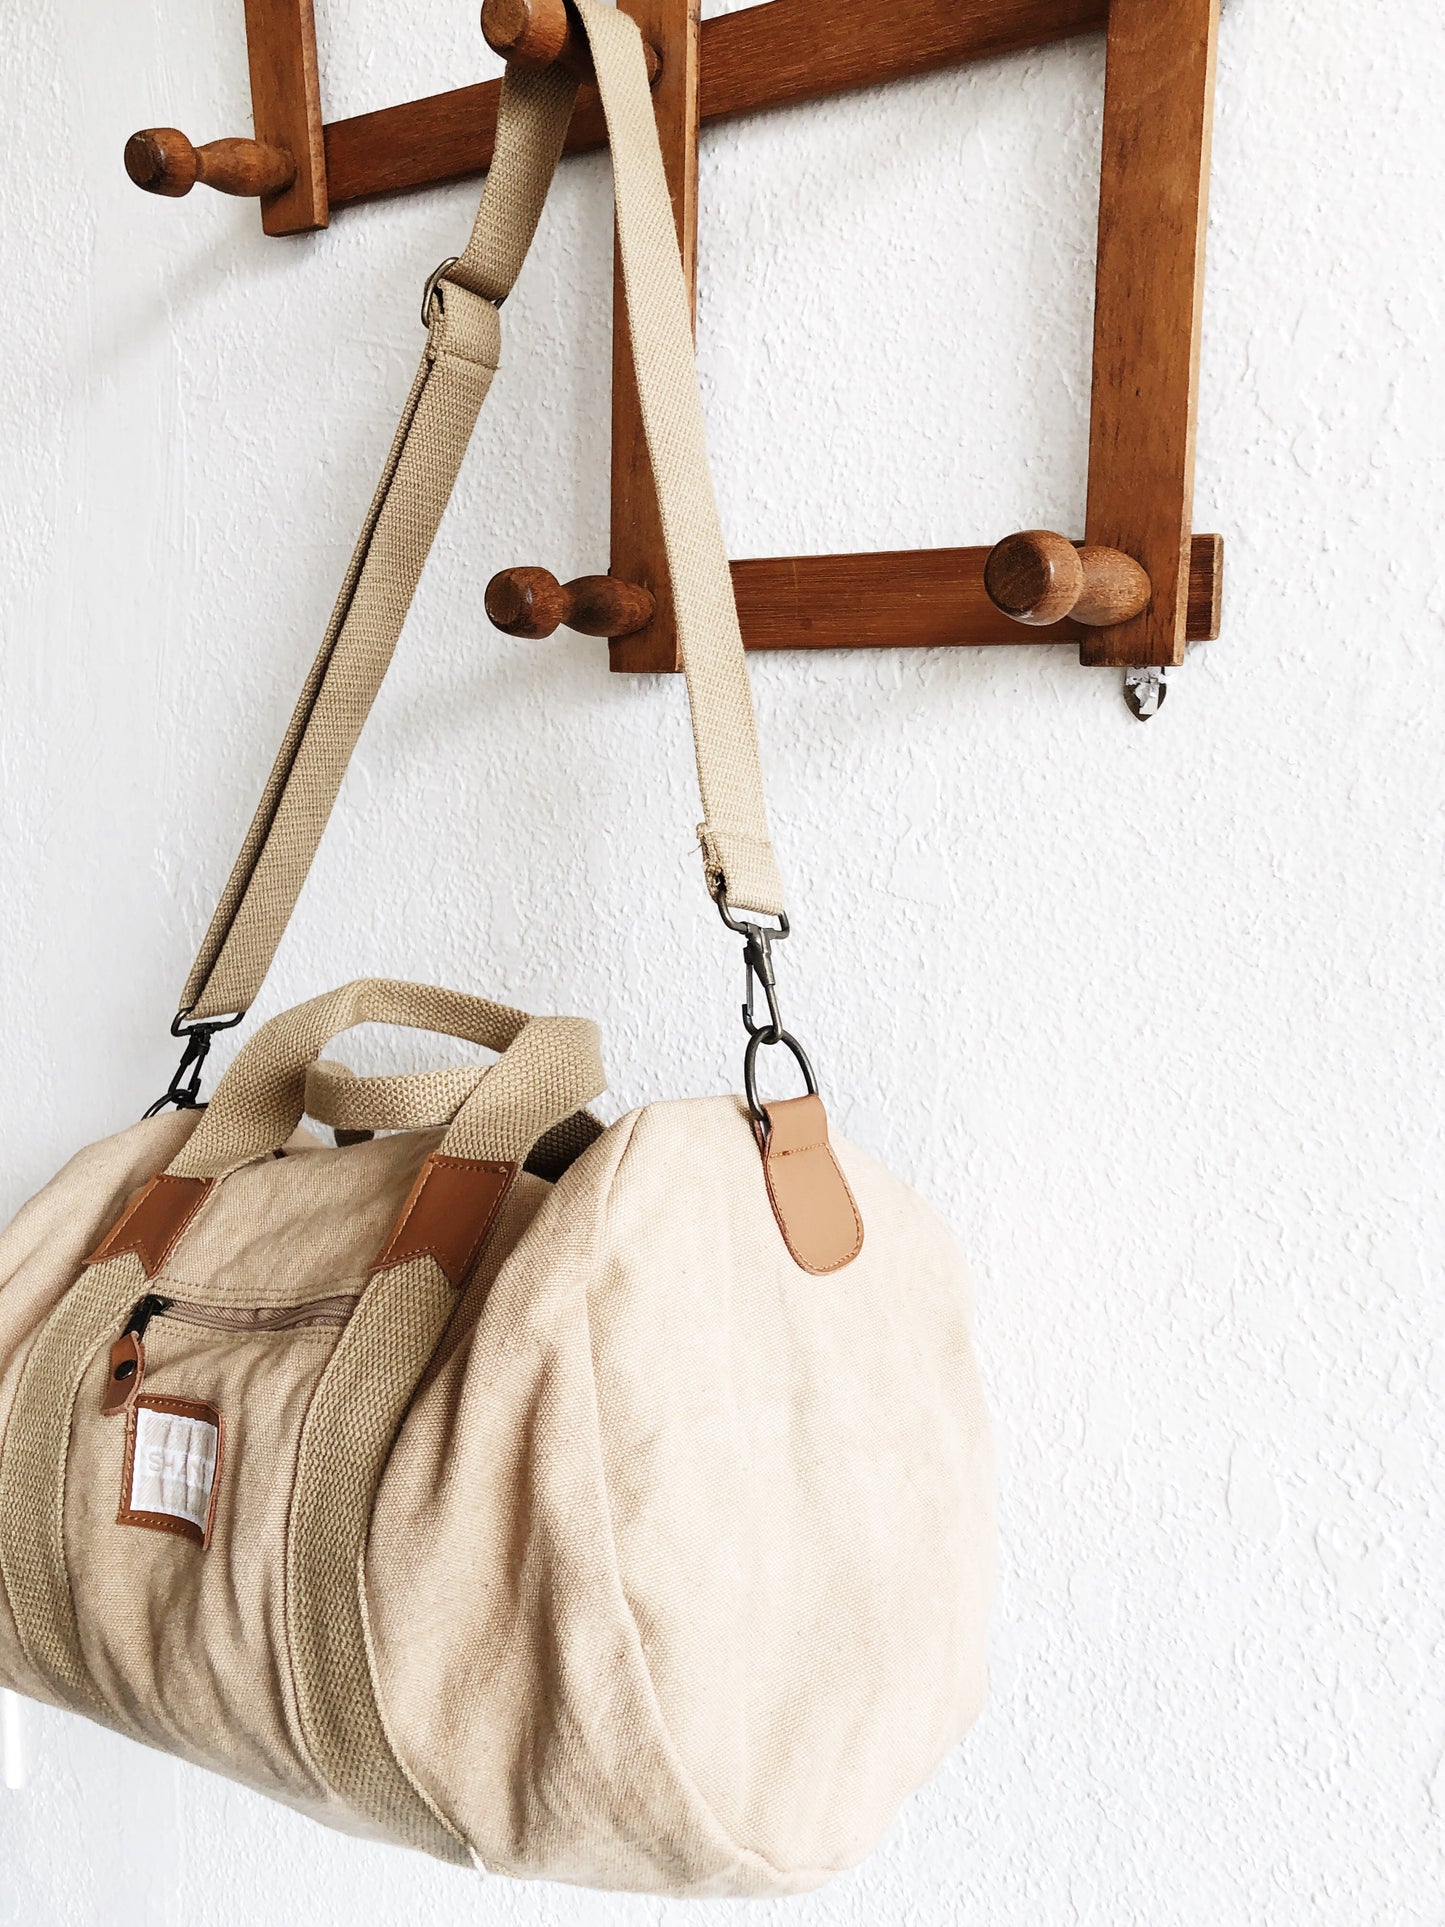 Vintage Deadstock Canvas Duffle and Overnight Bag